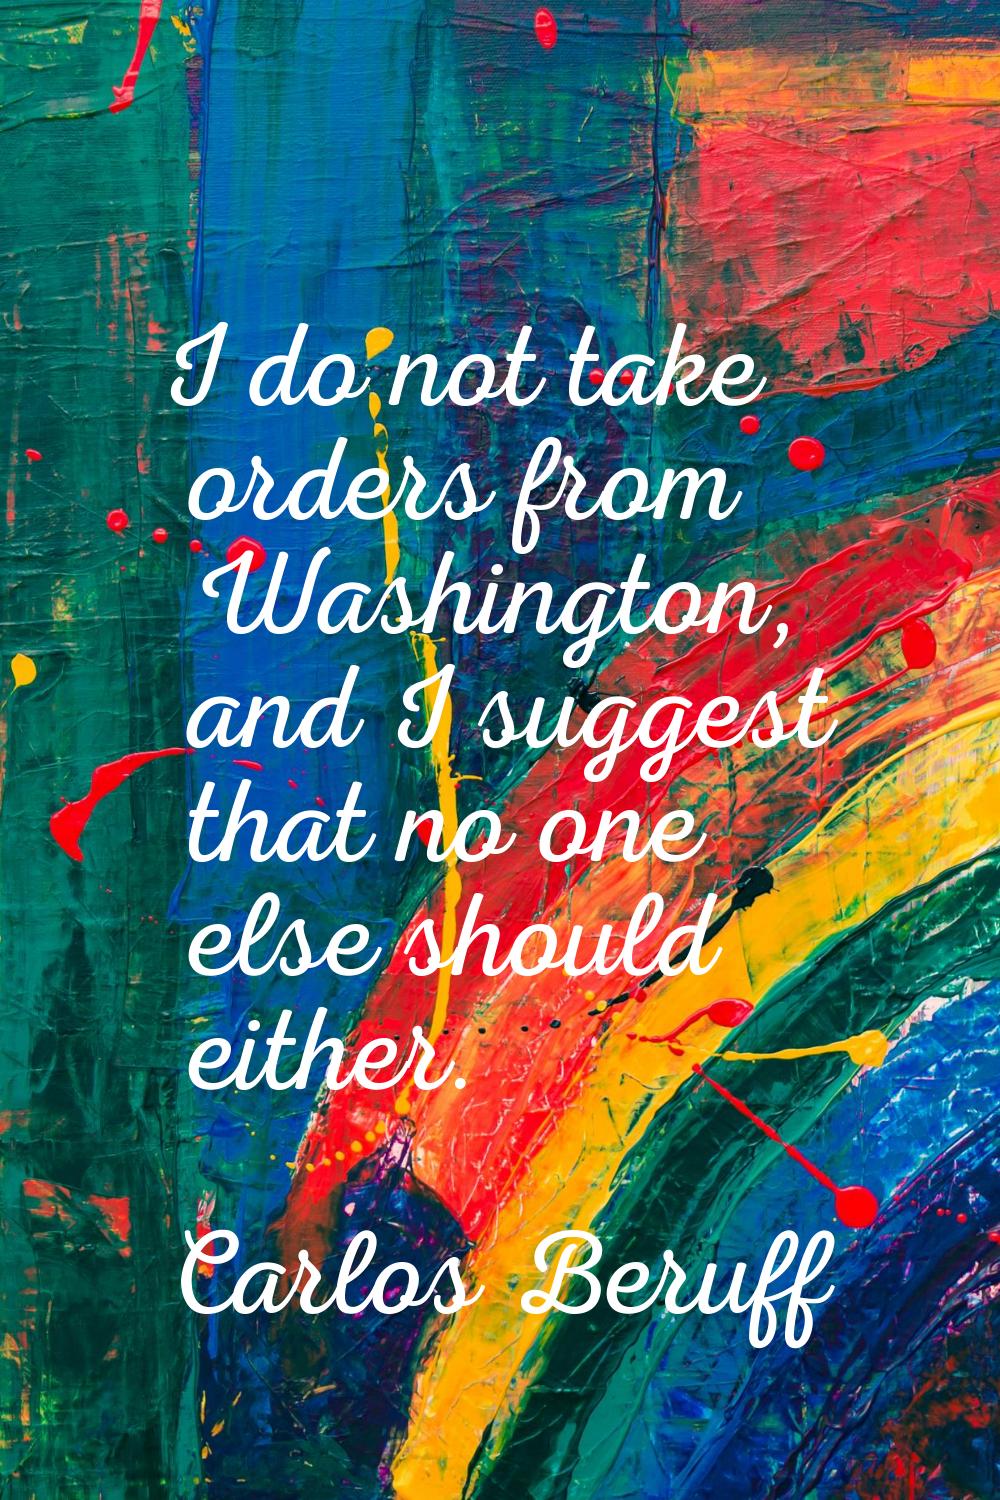 I do not take orders from Washington, and I suggest that no one else should either.